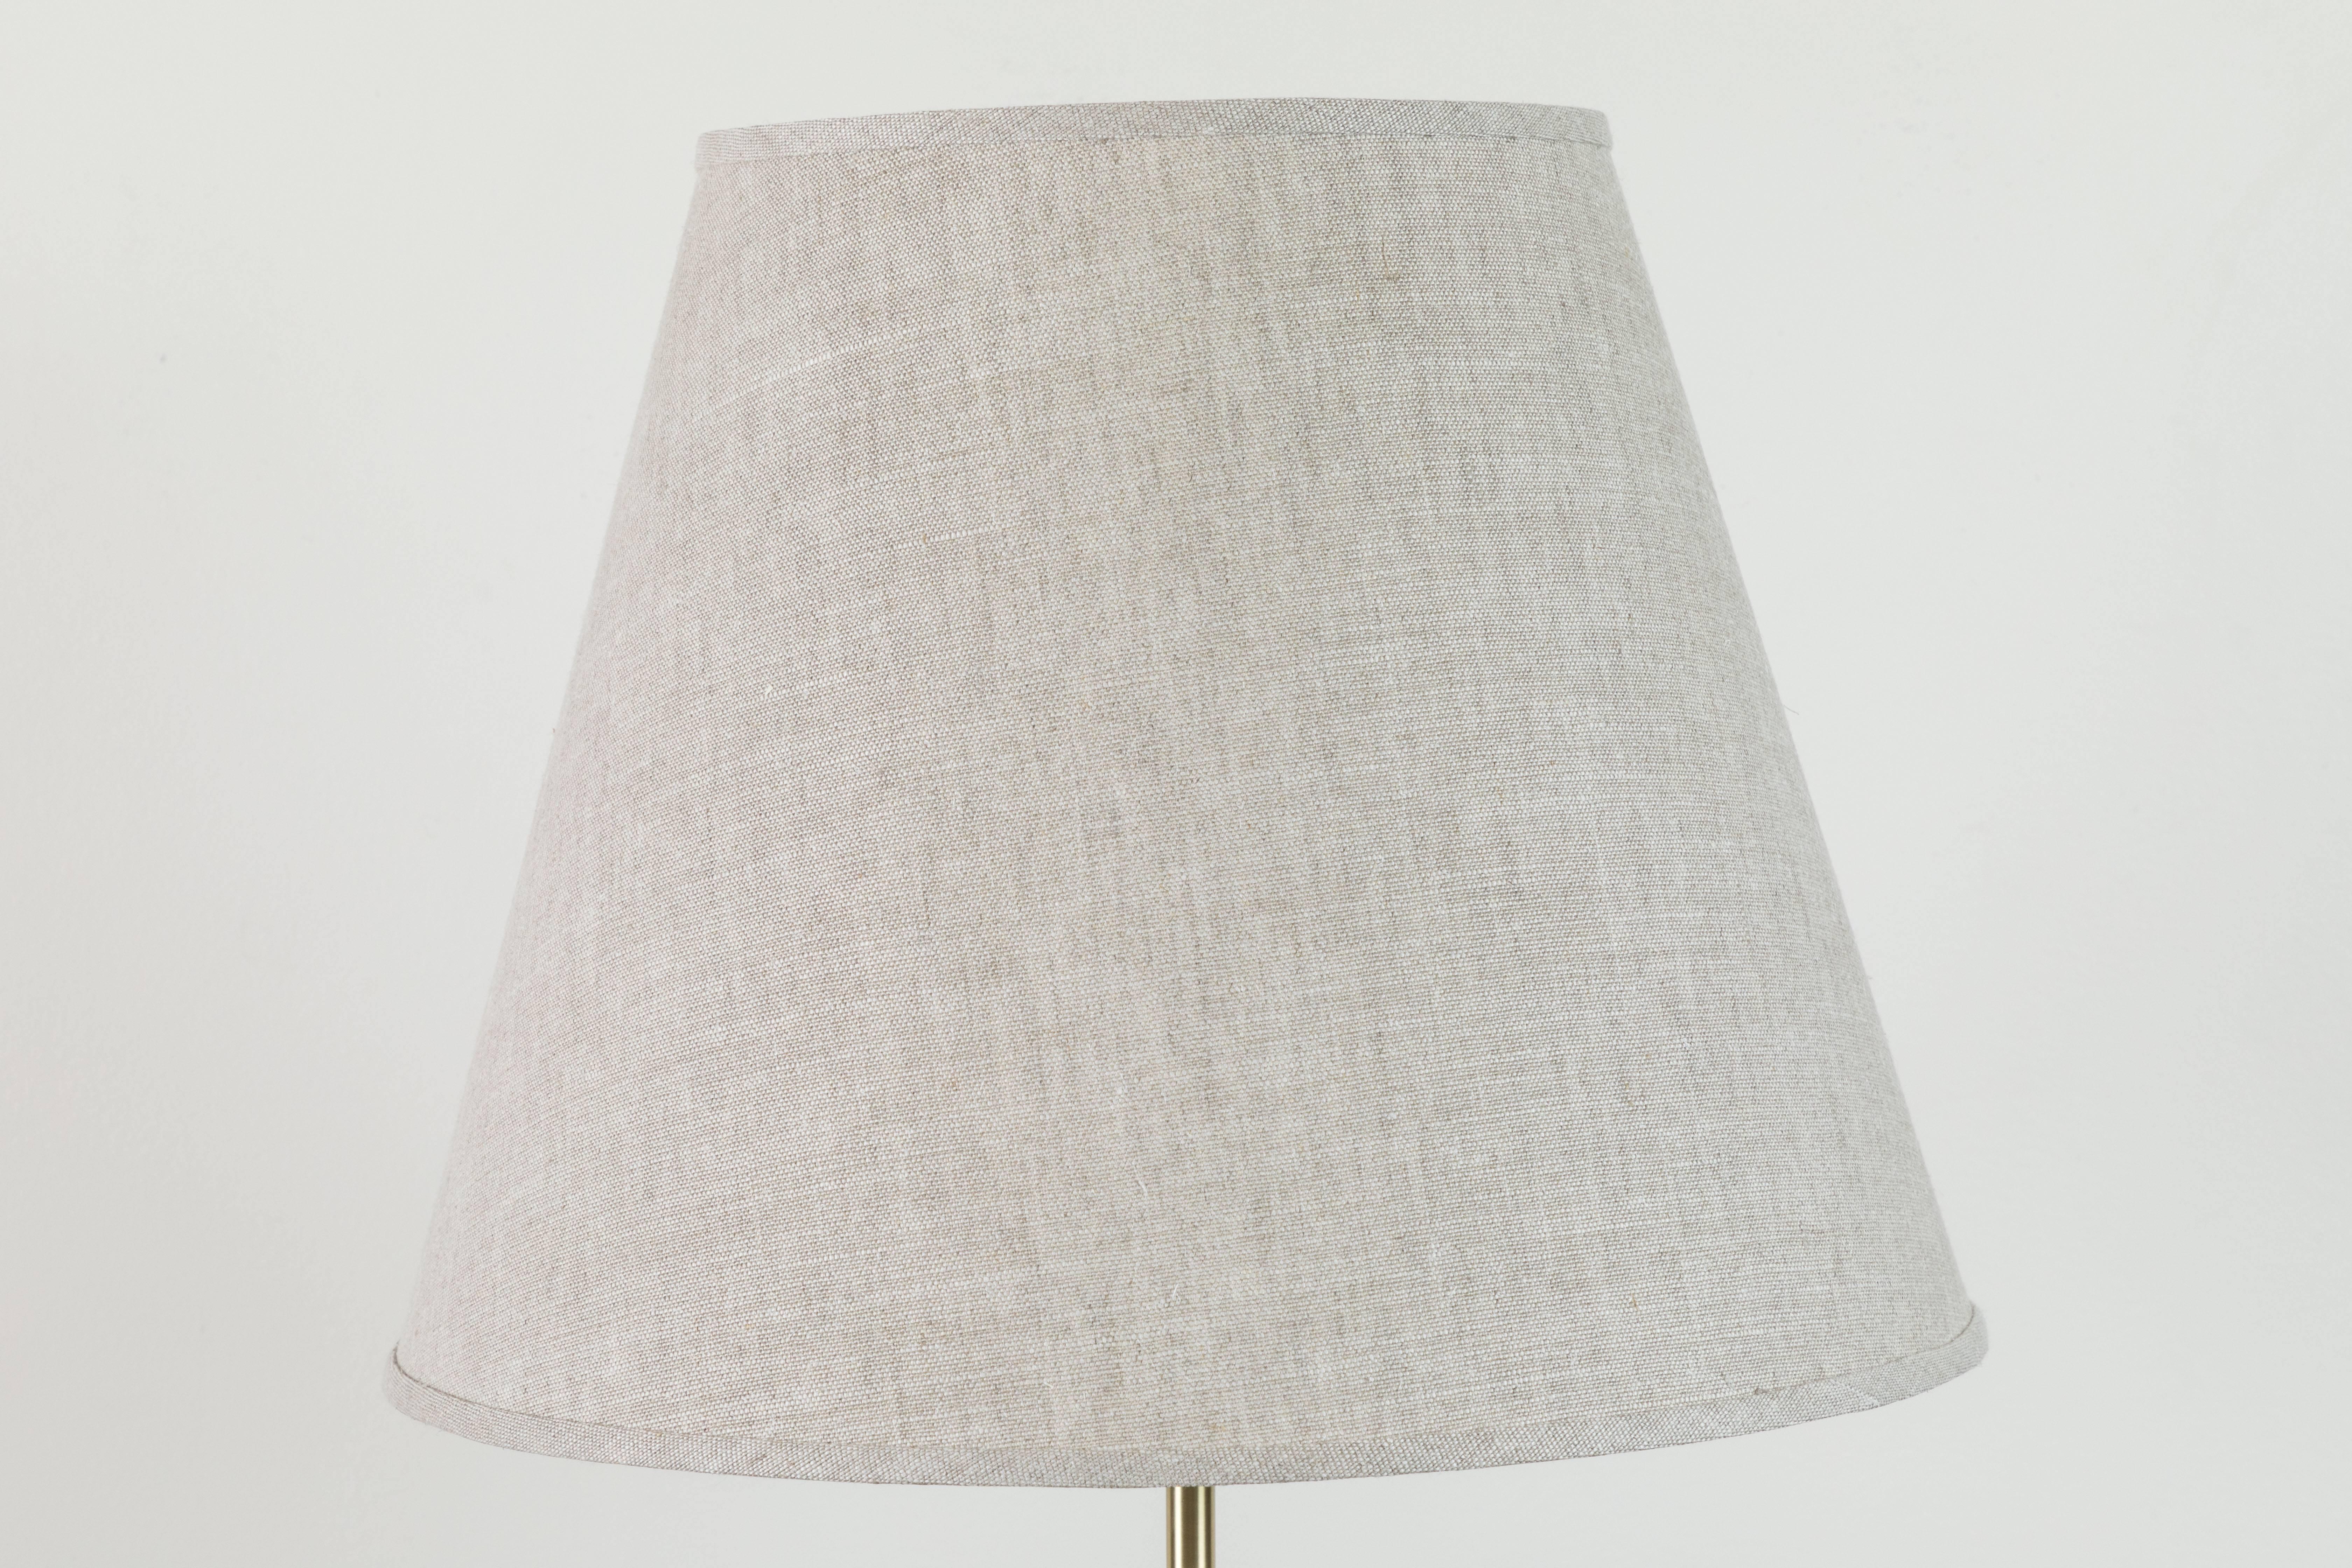 Mid-Century Modern Pair of Bryce Lamps by Stone and Sawyer for Lawson-Fenning